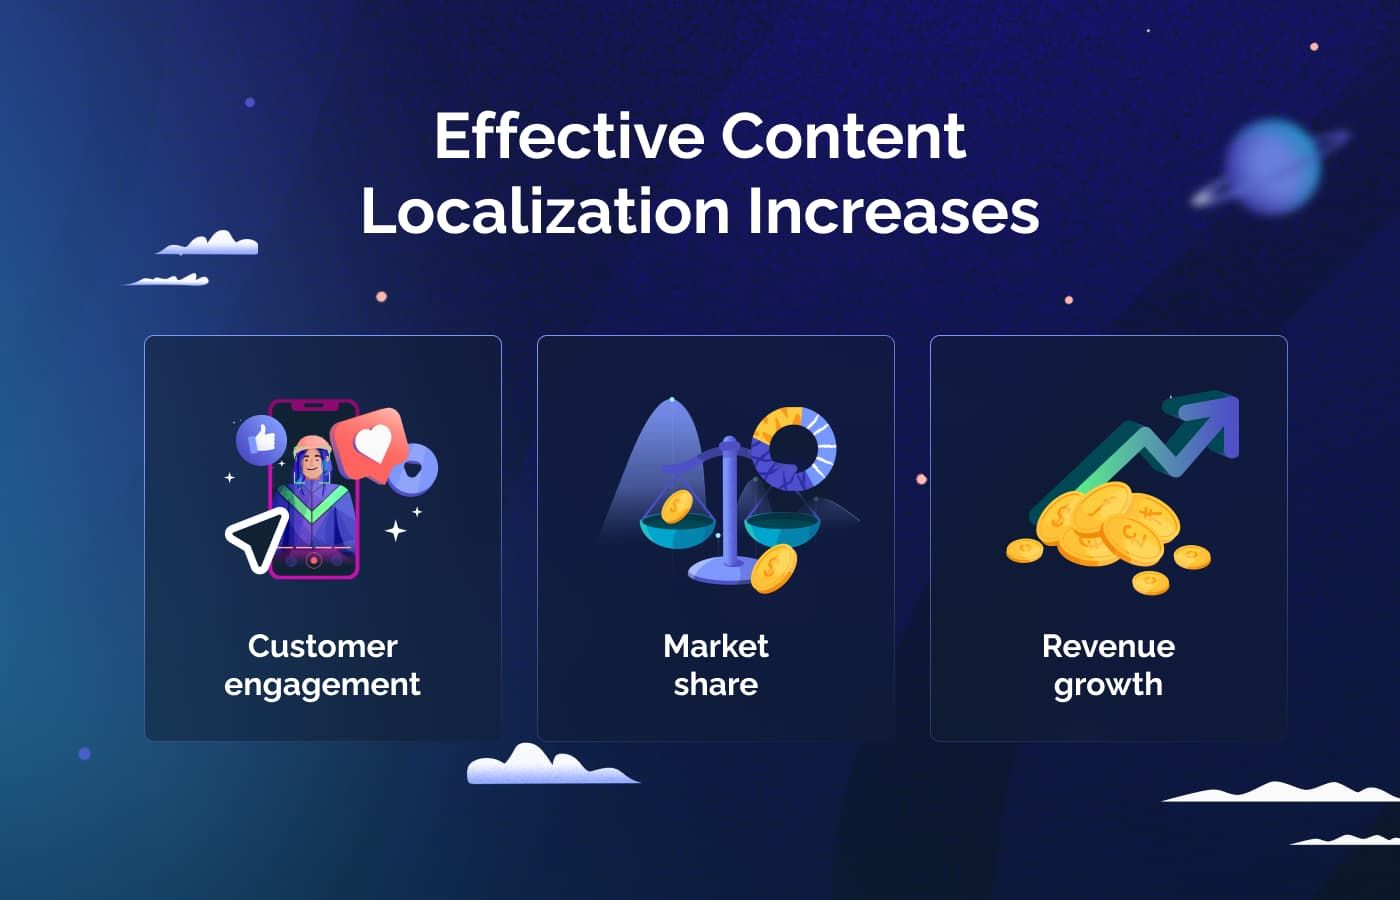 An infographic that shows the top benefits of content localization: Greater customer engagement, market share and revenue growth.